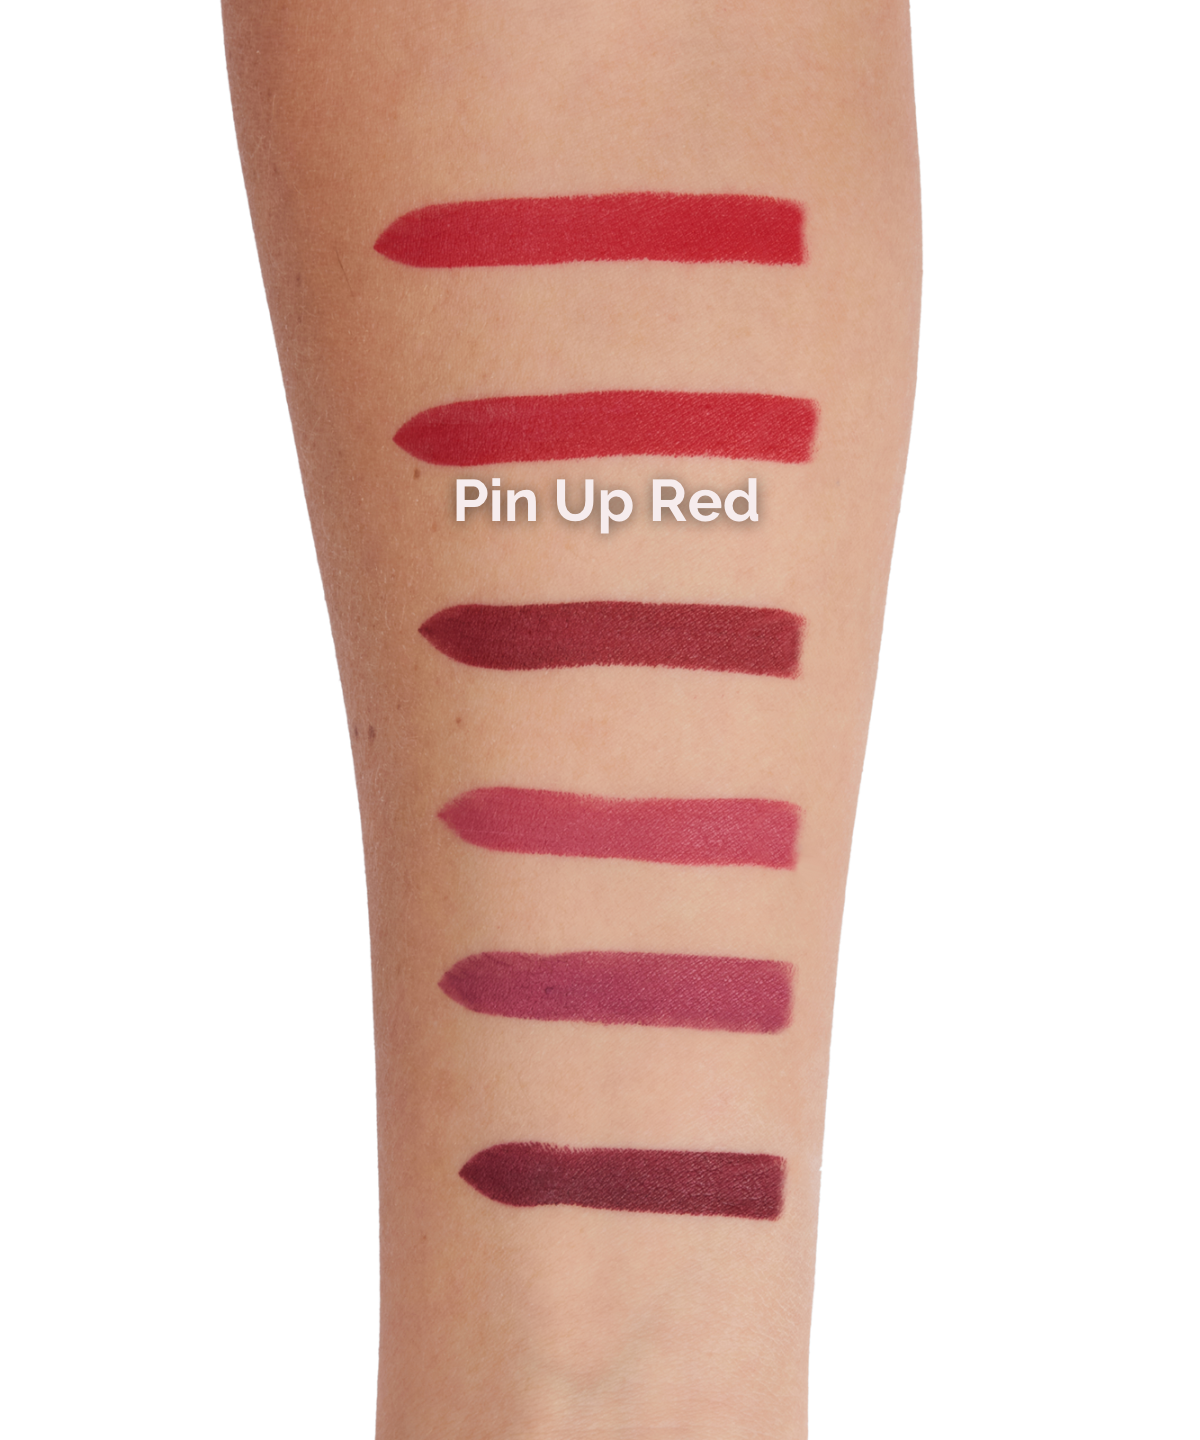 Absolute Natural Lipstick Pin Up Red - Rossetto rosso Gil Cagné